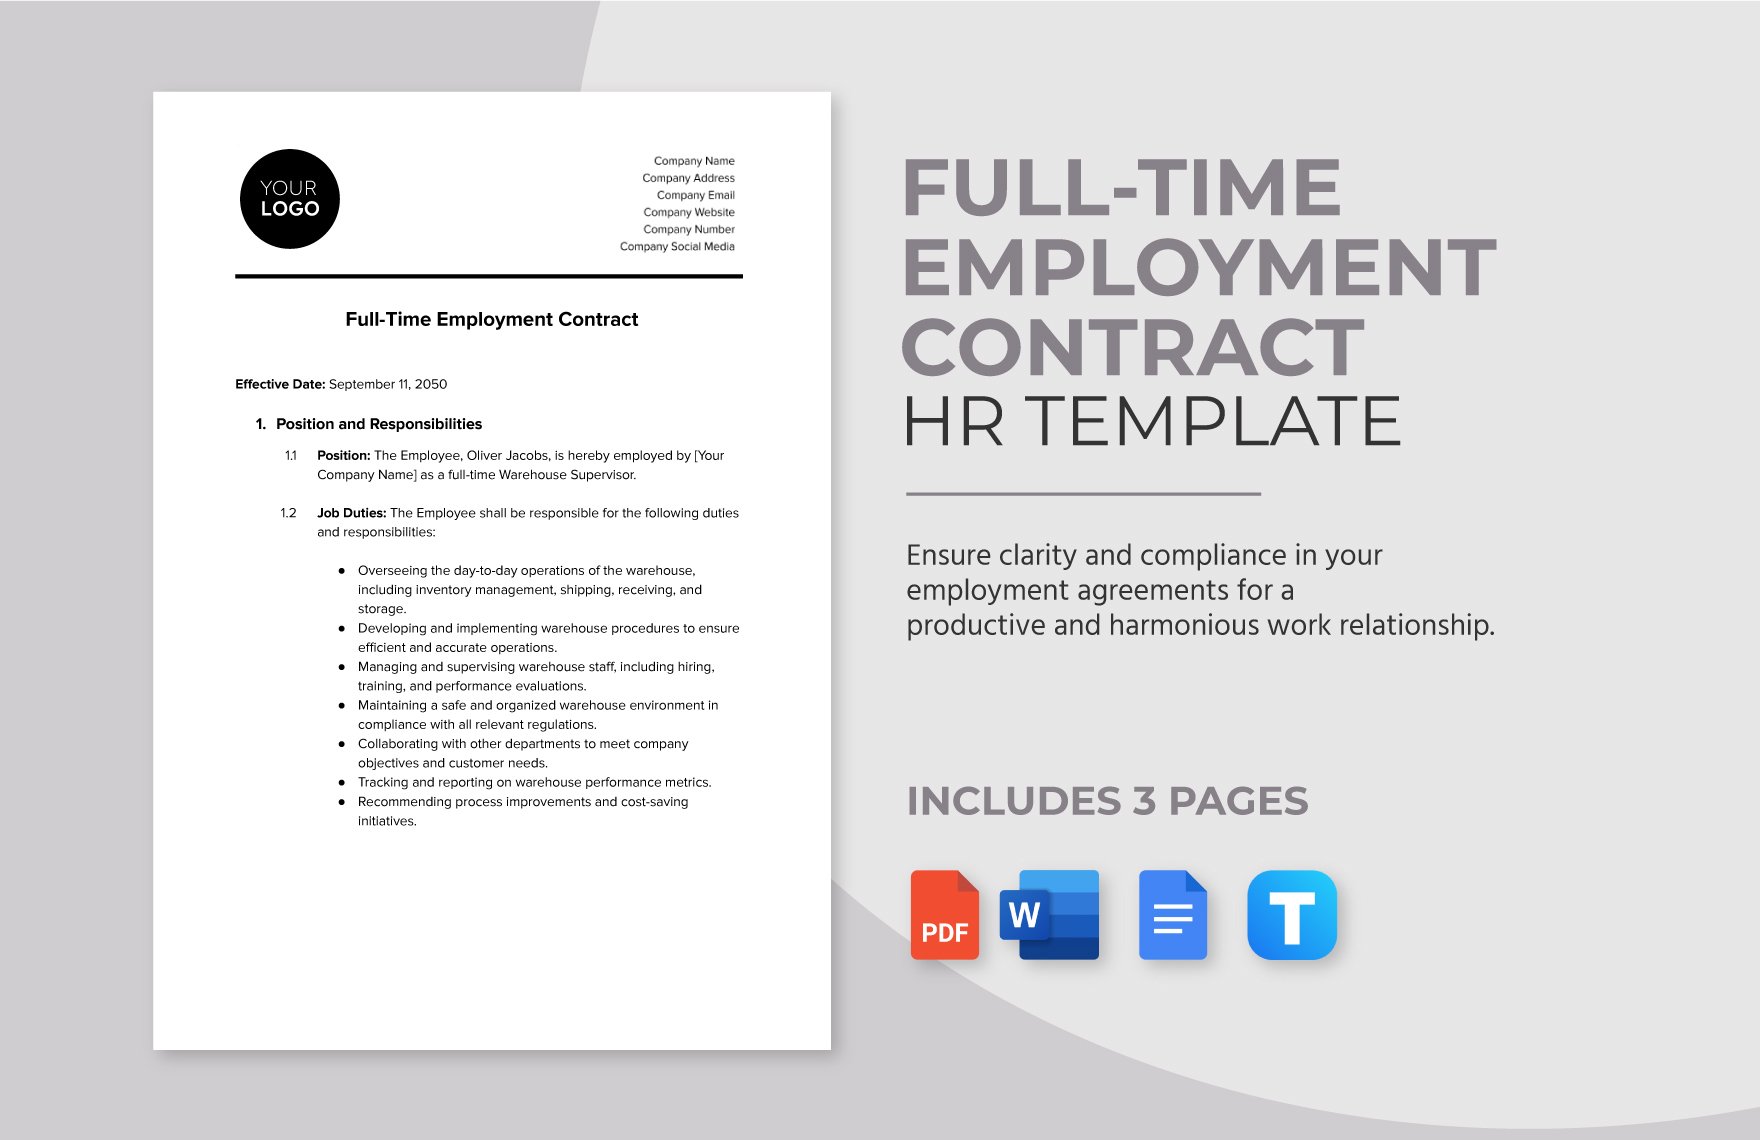 Full-time Employment Contract HR Template in Word, Google Docs, PDF